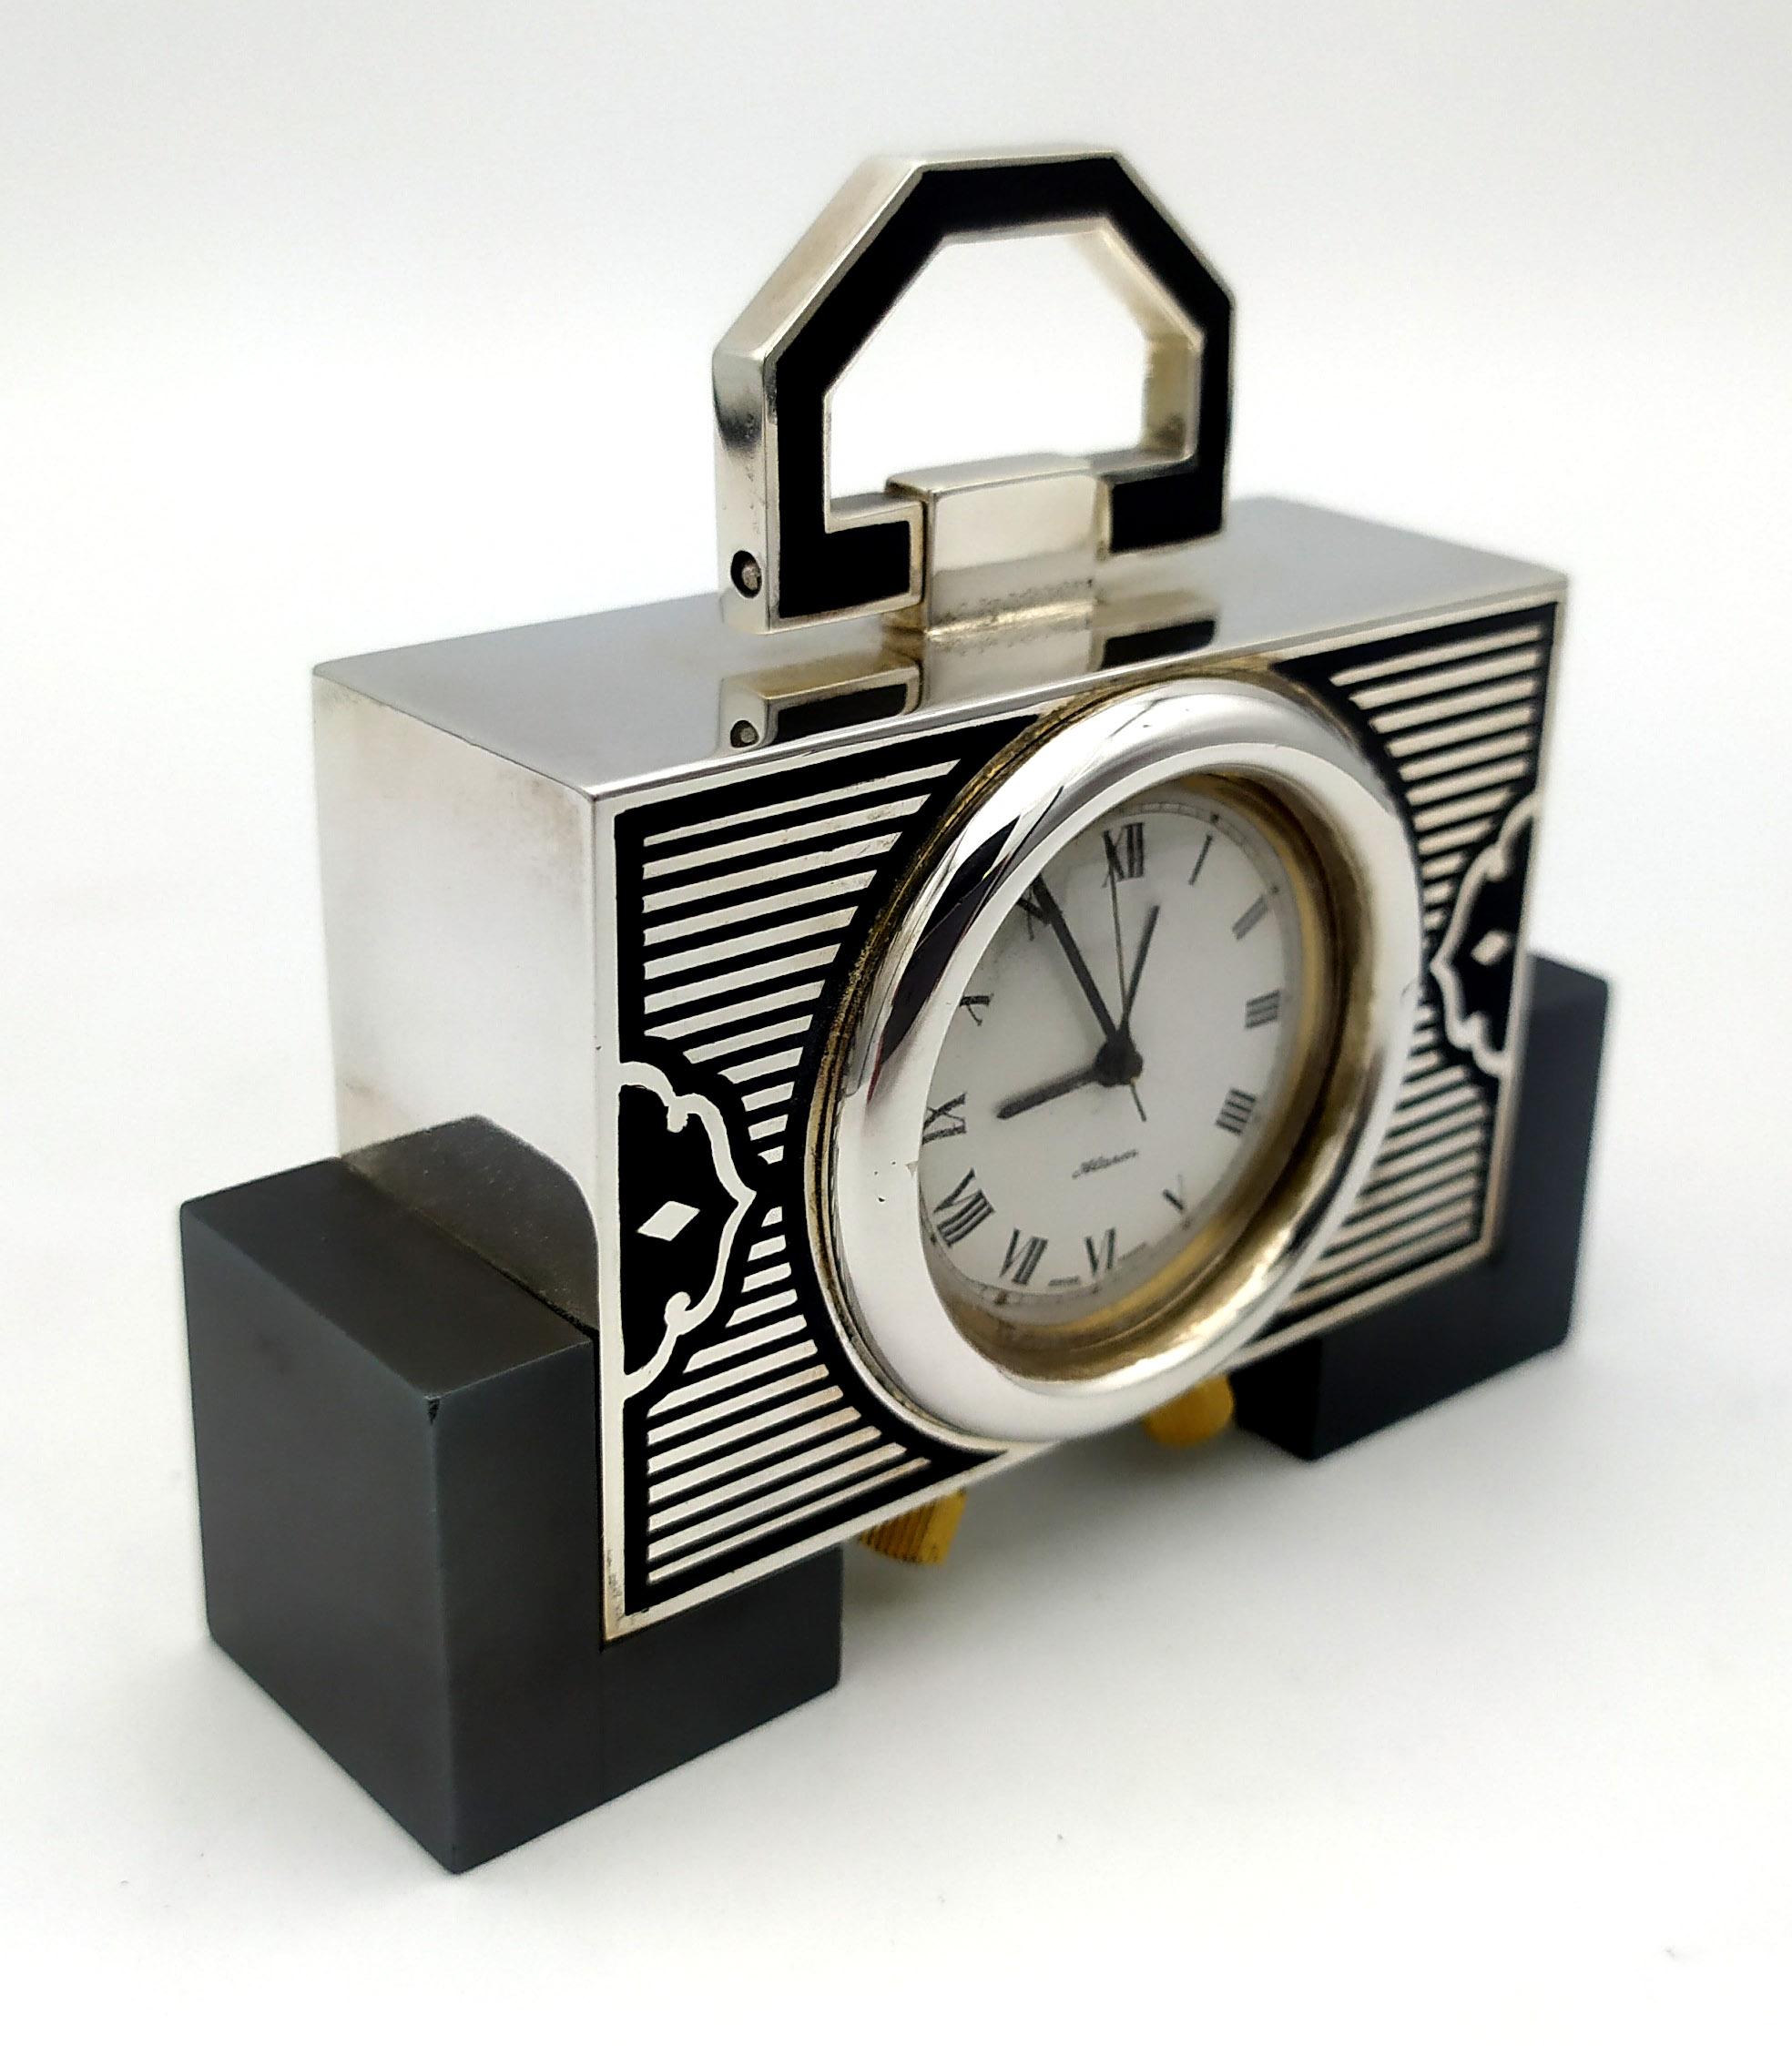 Small travel table clock in 925/1000 sterling silver with Art Deco design fire enameled in black colour. Angular hematite feet. Swiss mechanical movement by Maison Pontifa (Neuchatel) with 8 days charge and alarm. Measures 7.2 x 8 x 2.3 cm. Silver